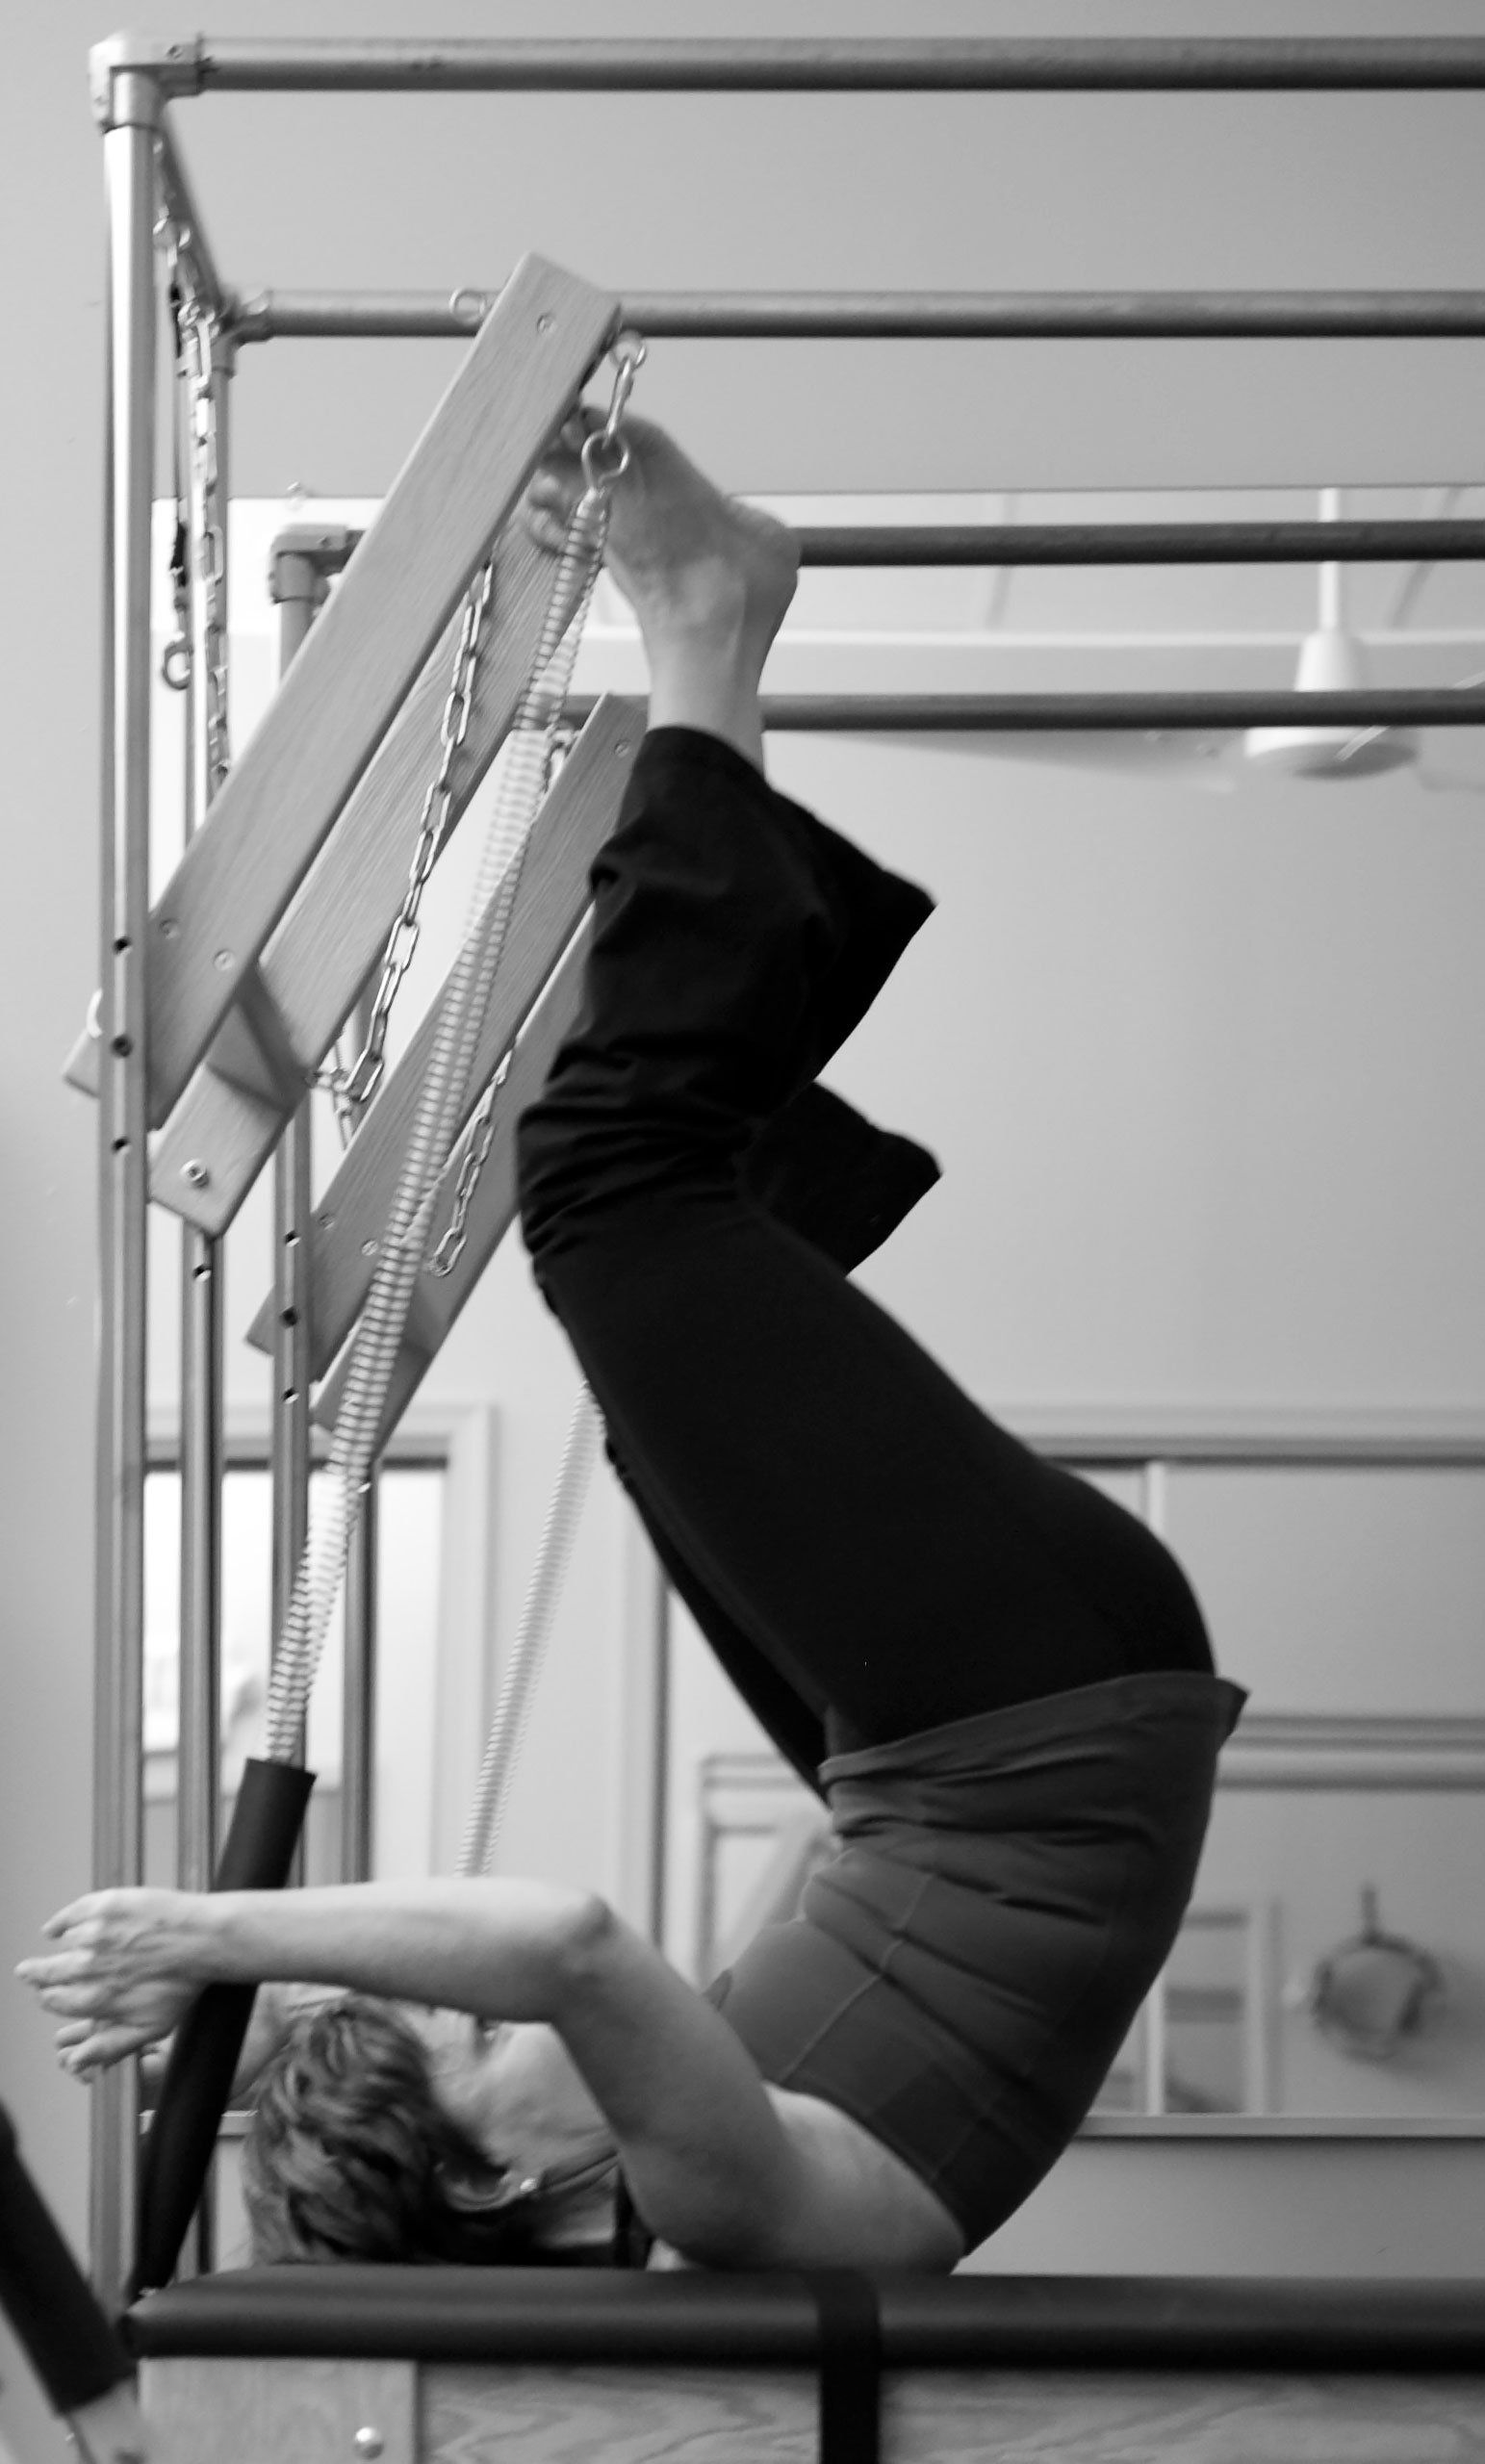 A black and white photo of a person doing pilates